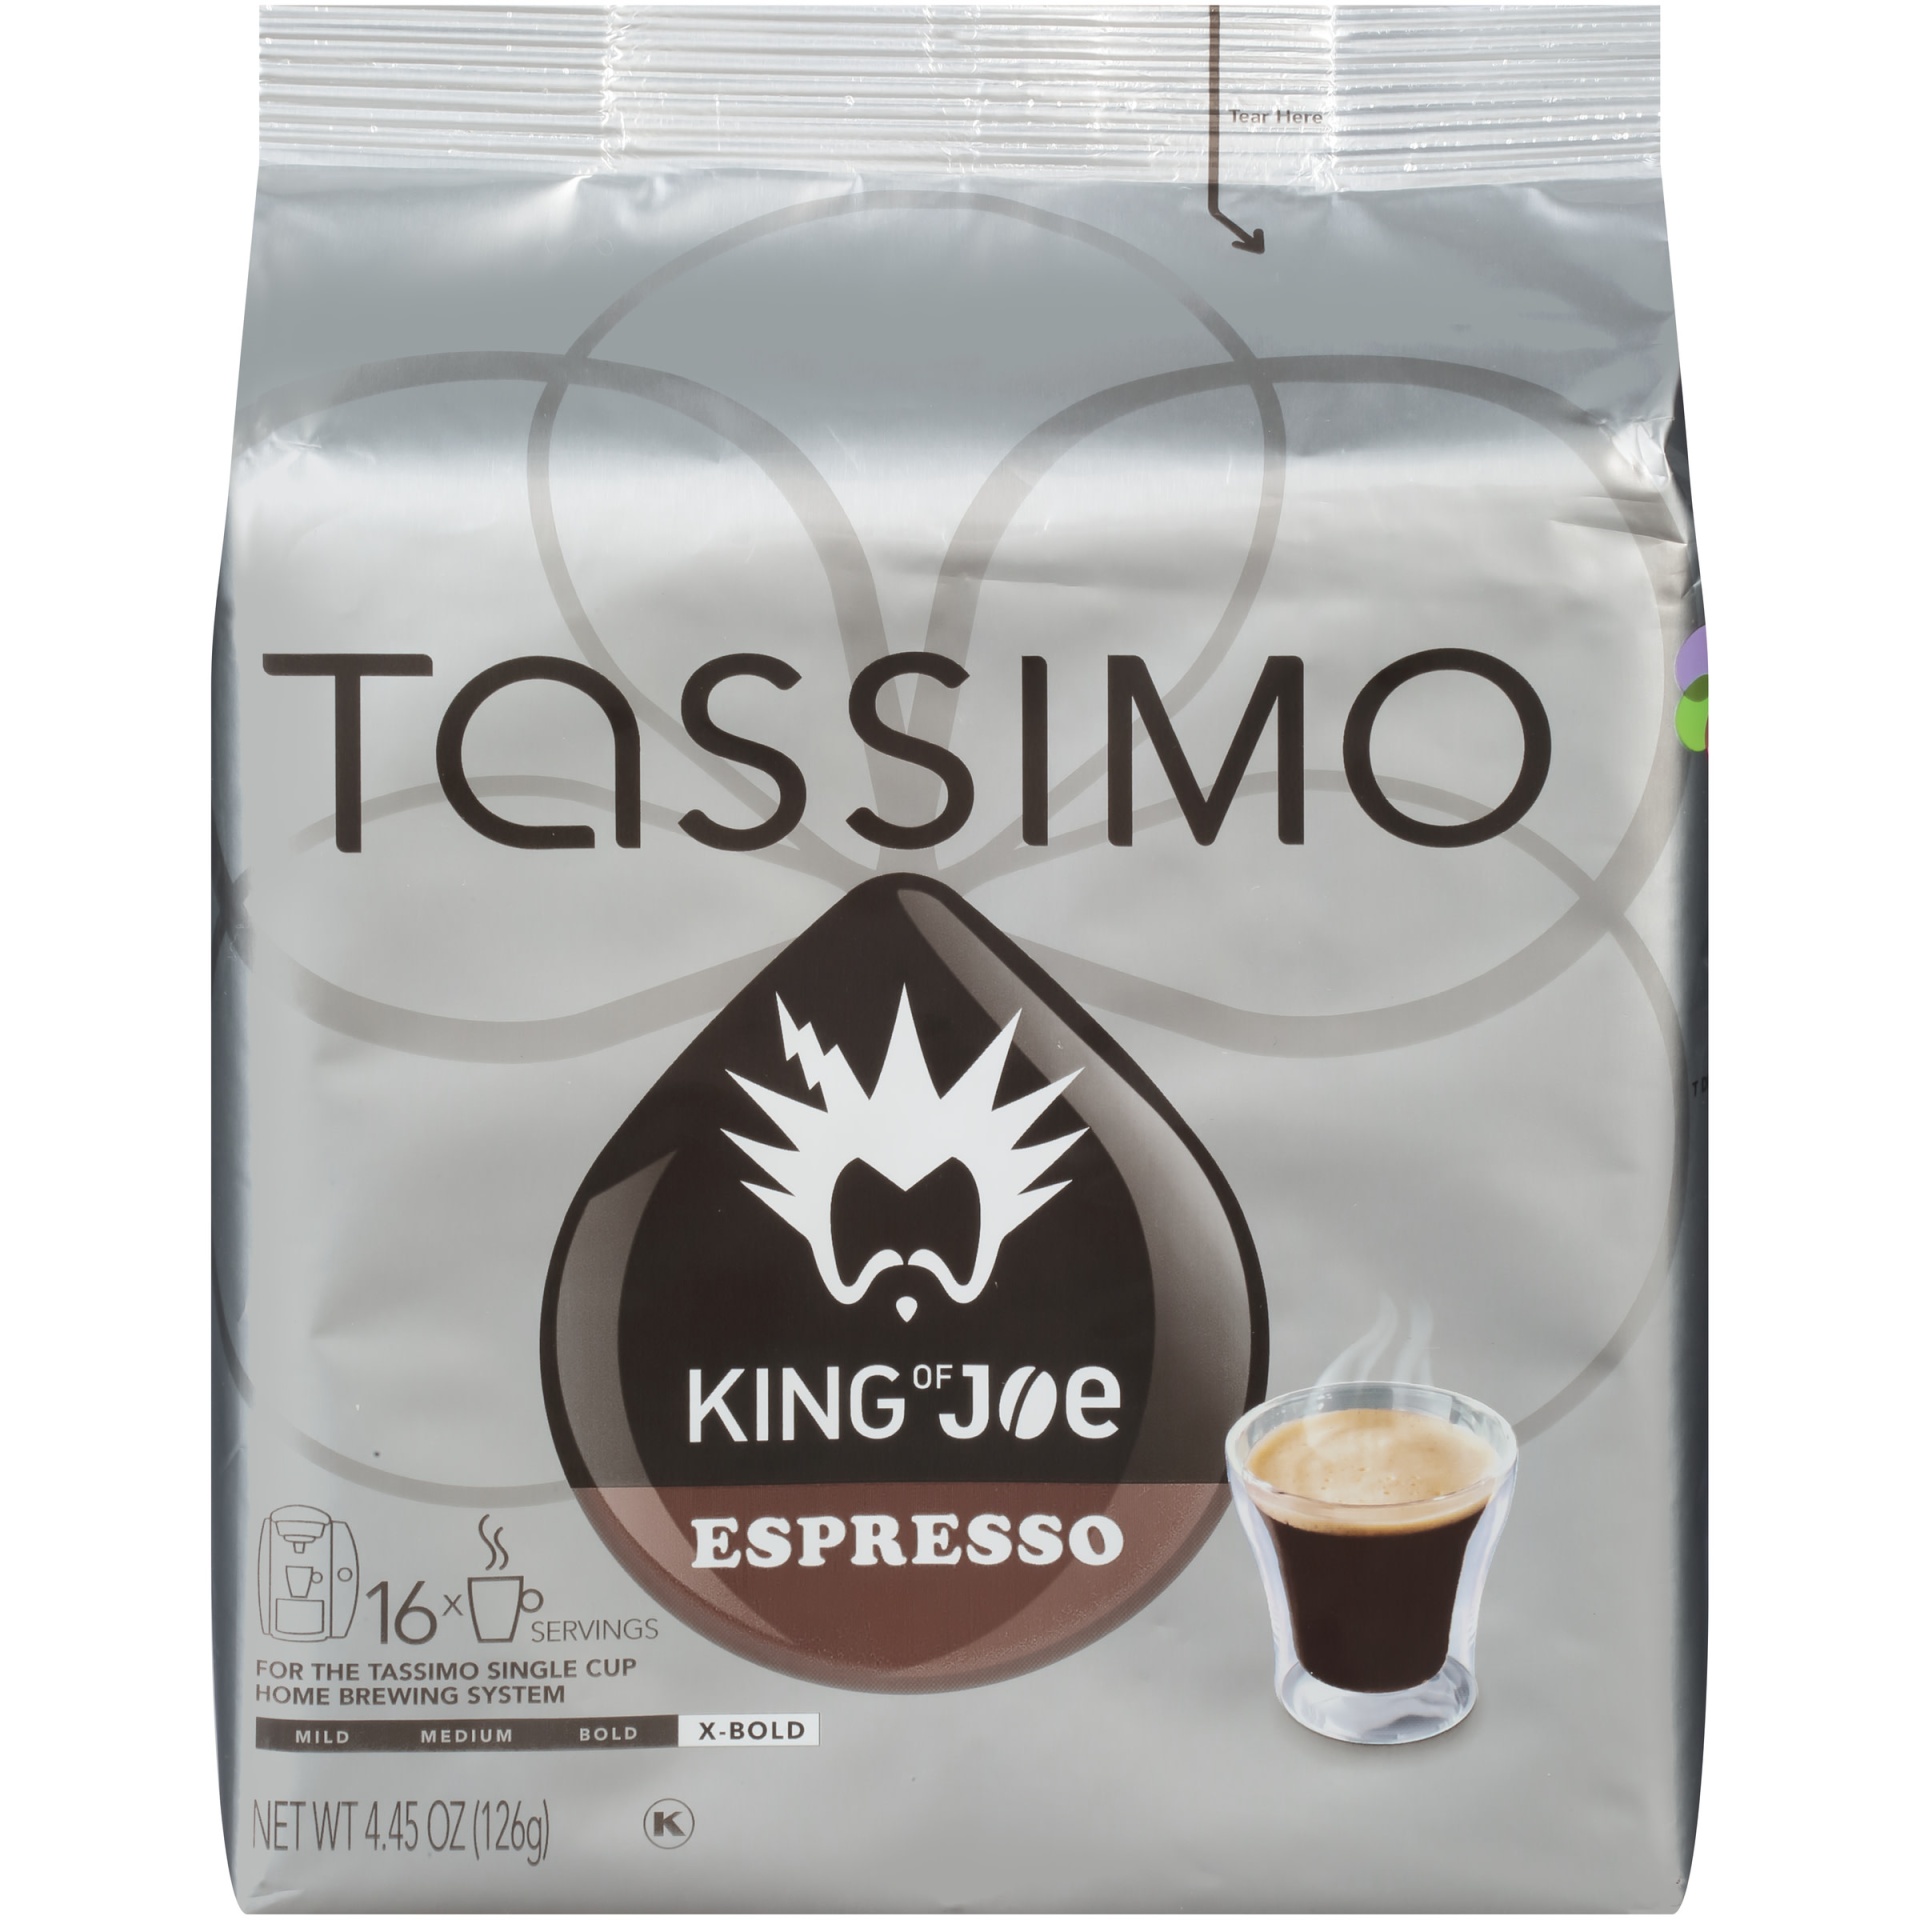 slide 1 of 2, Tassimo King of Joe Espresso Extra Bold Dark Roast Coffee T-Discs for Tassimo Single Cup Home Brewing Systems Pack, 4.5 oz